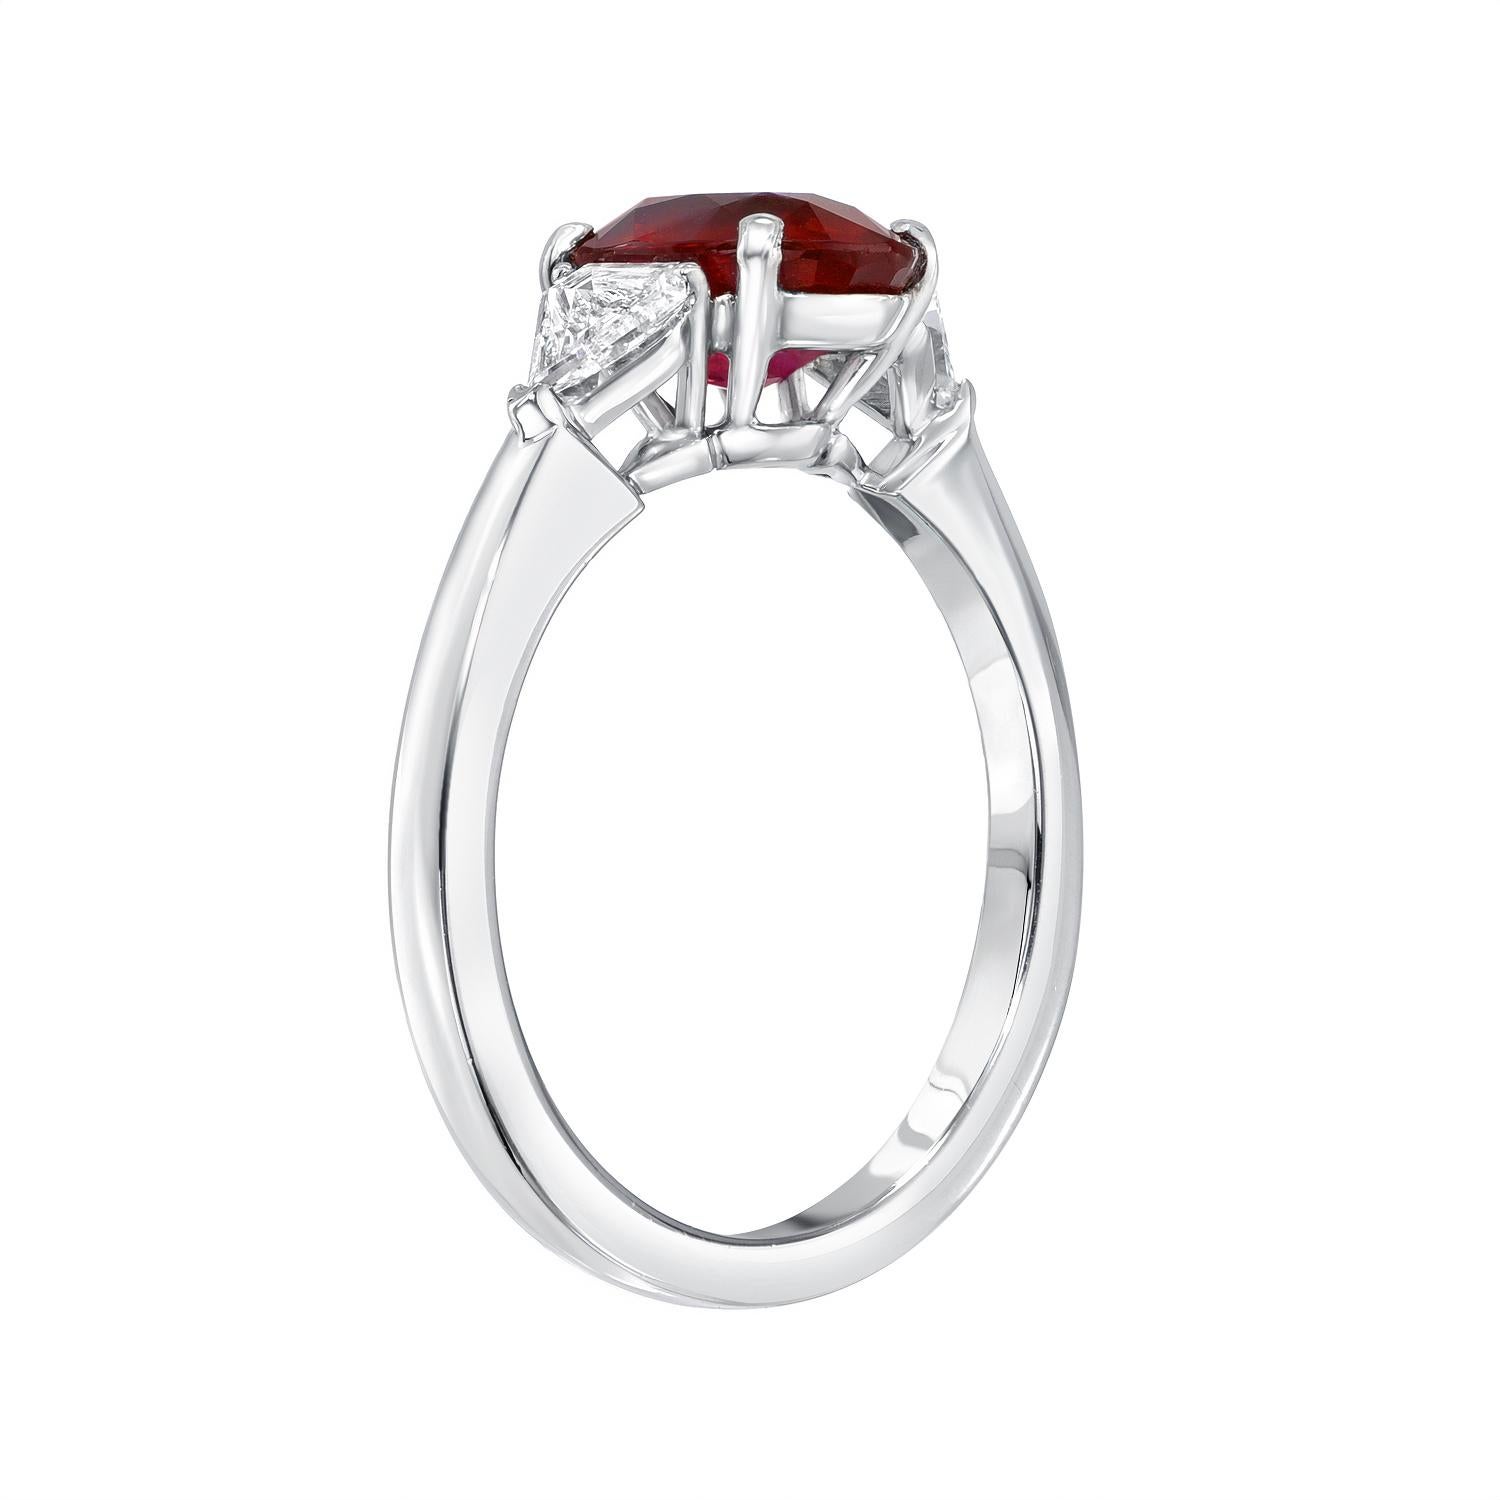 Very desirable 2.34 carat oval Burmese Ruby three-stone platinum ring, flanked by a pair of trillion diamonds weighing a total of 0.34 carats. 
Ring size 6.5. Resizing is complementary upon request.
Crafted by extremely skilled hands in the